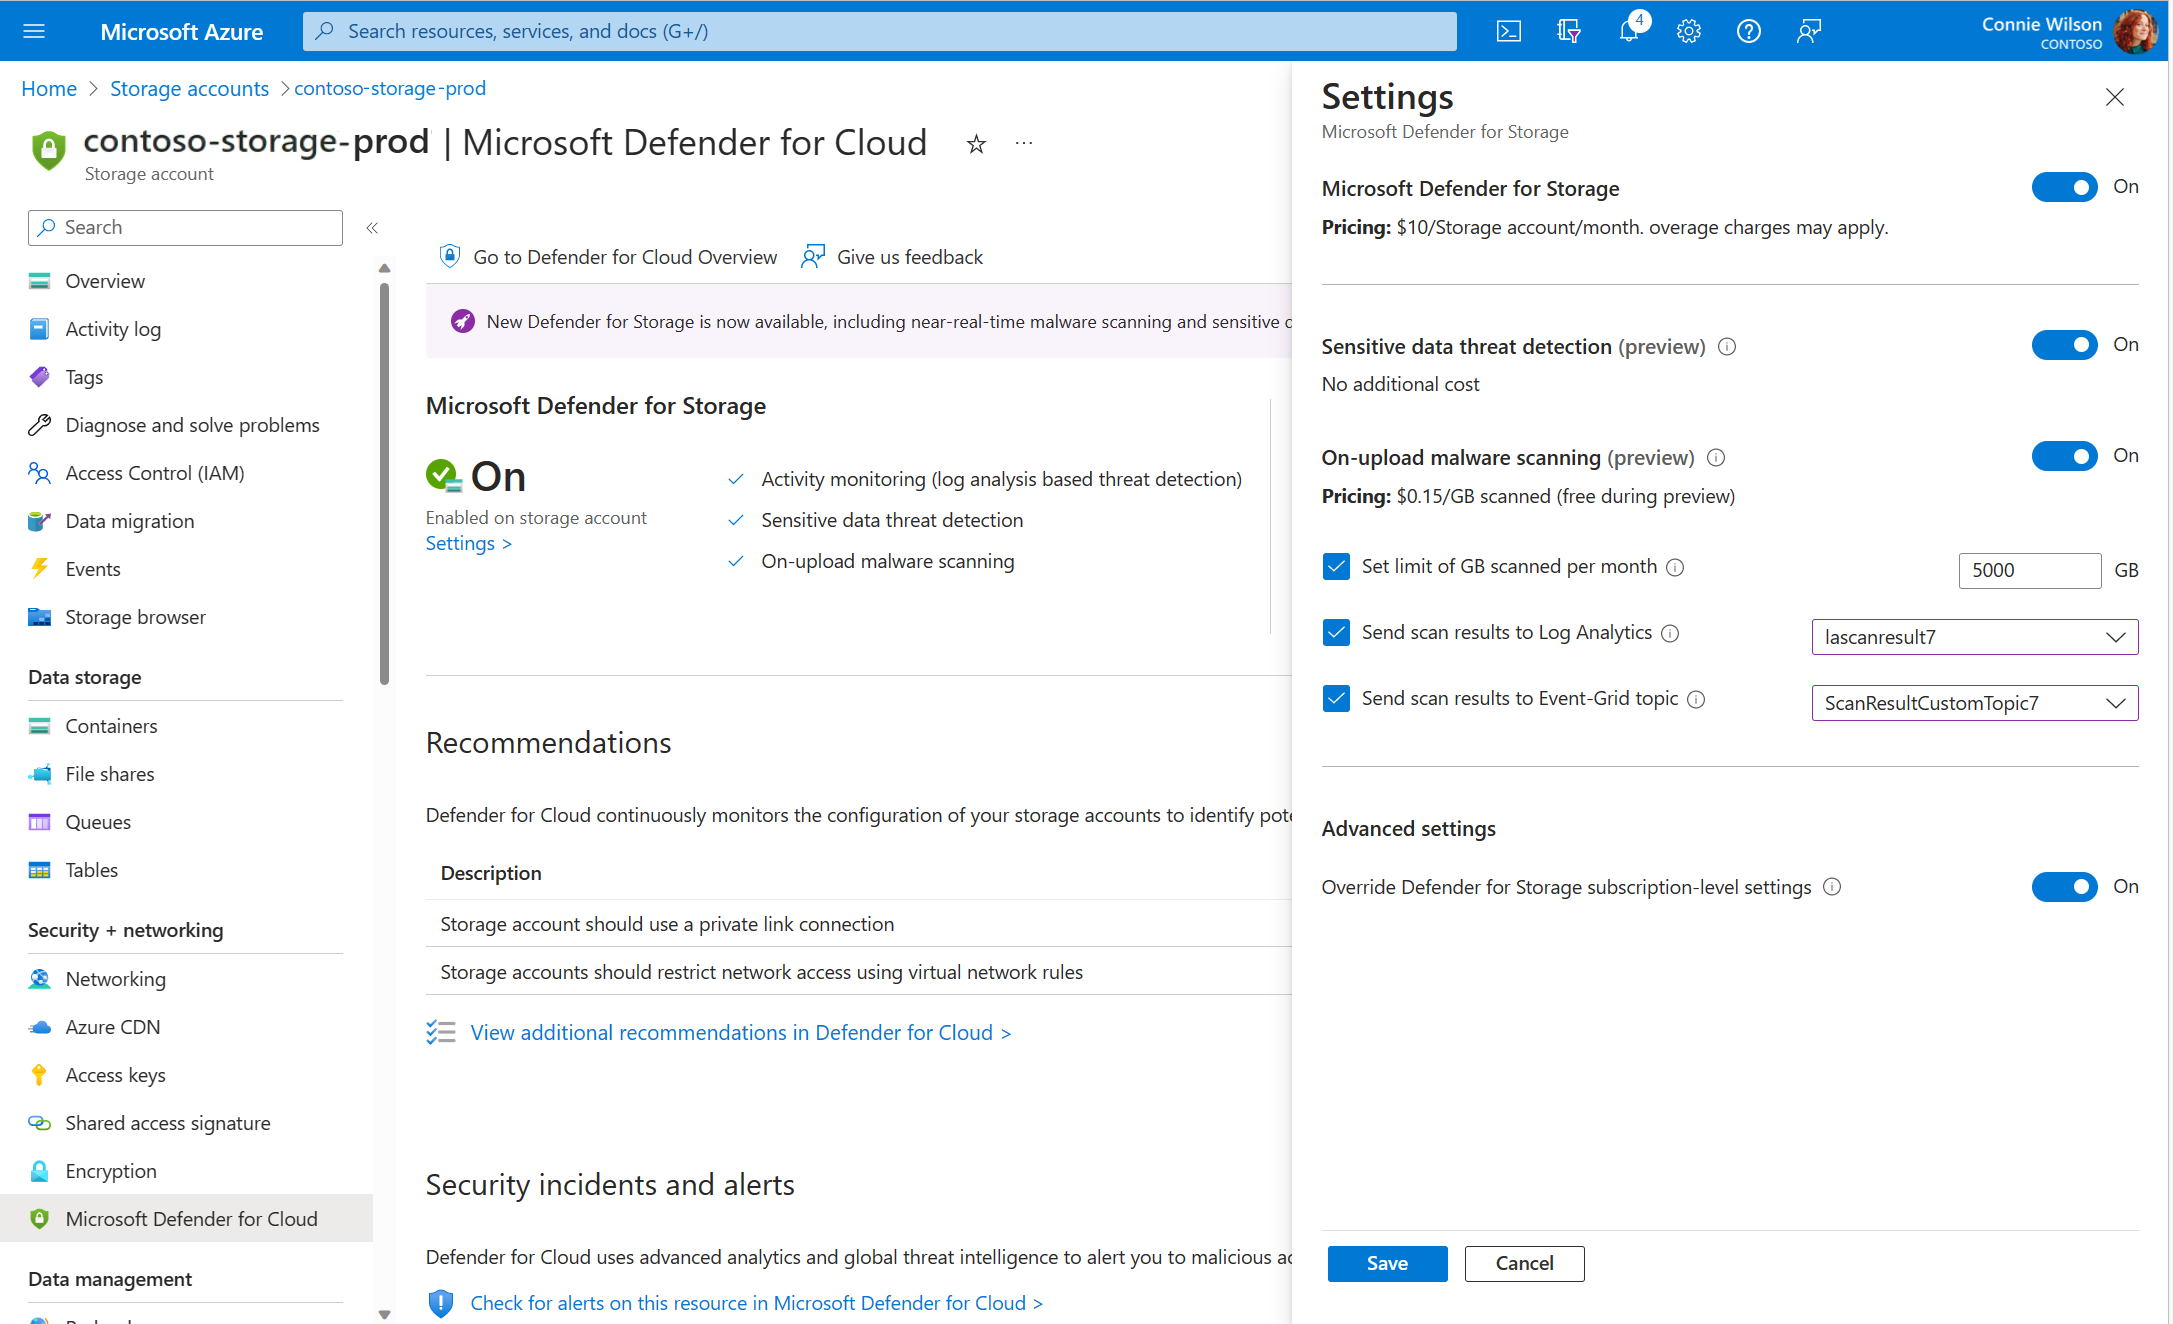 Screenshot showing where to turn off Defender for Storage in the Azure portal.